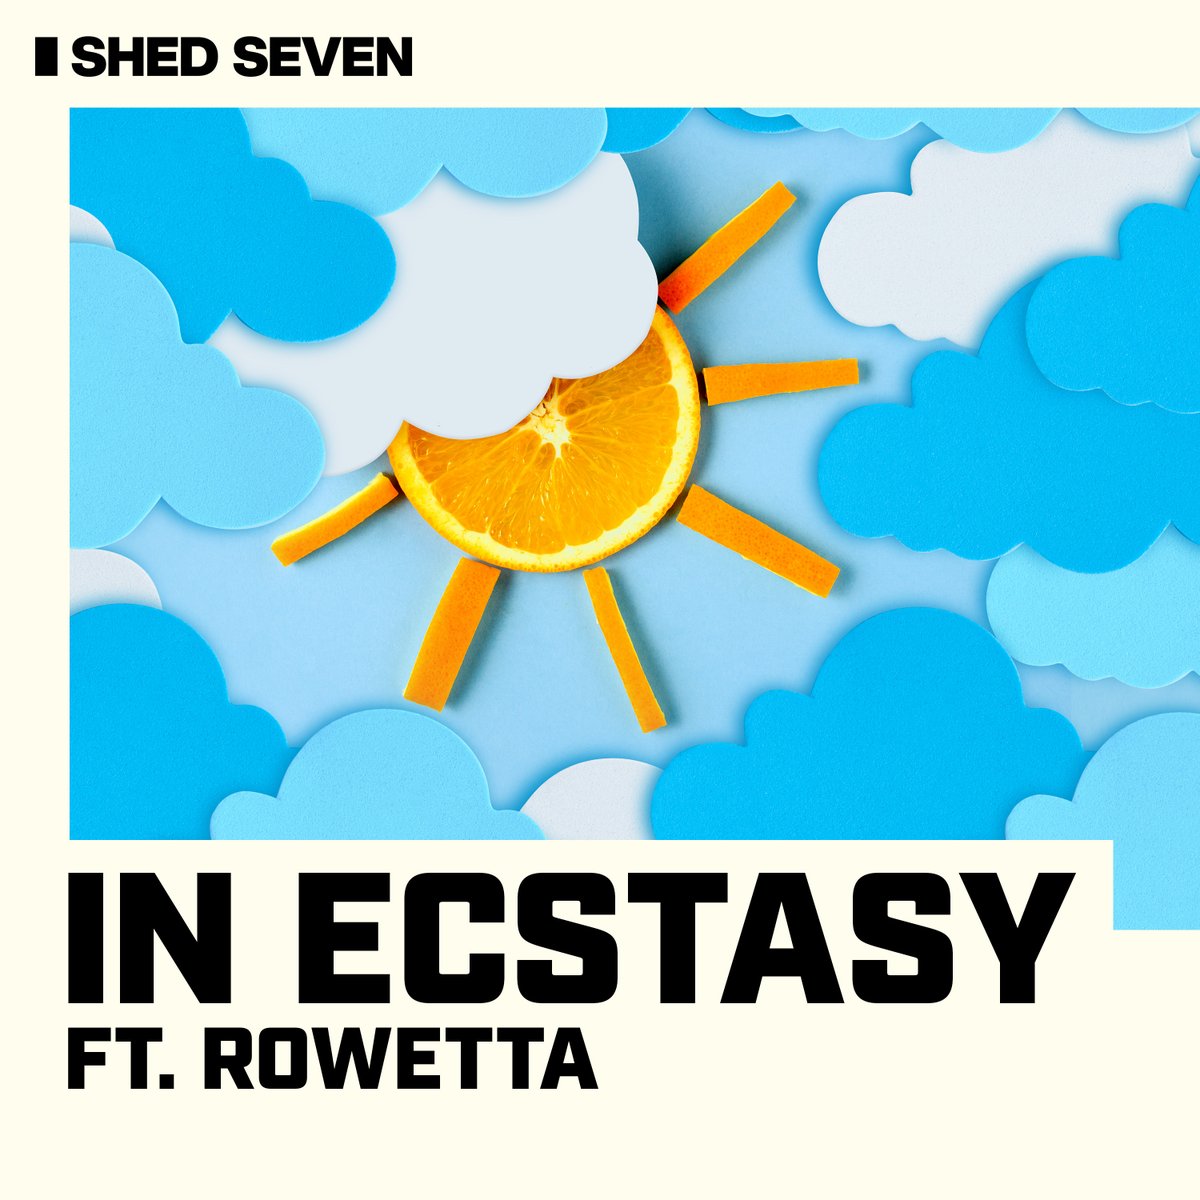 Our brand new single, In Ecstasy, is out at midnight! It's the third release from our forthcoming album, A Matter of Time, and features the amazing @Rowetta! Pre-save and listen here: ShedSevenn.lnk.to/inecstasy